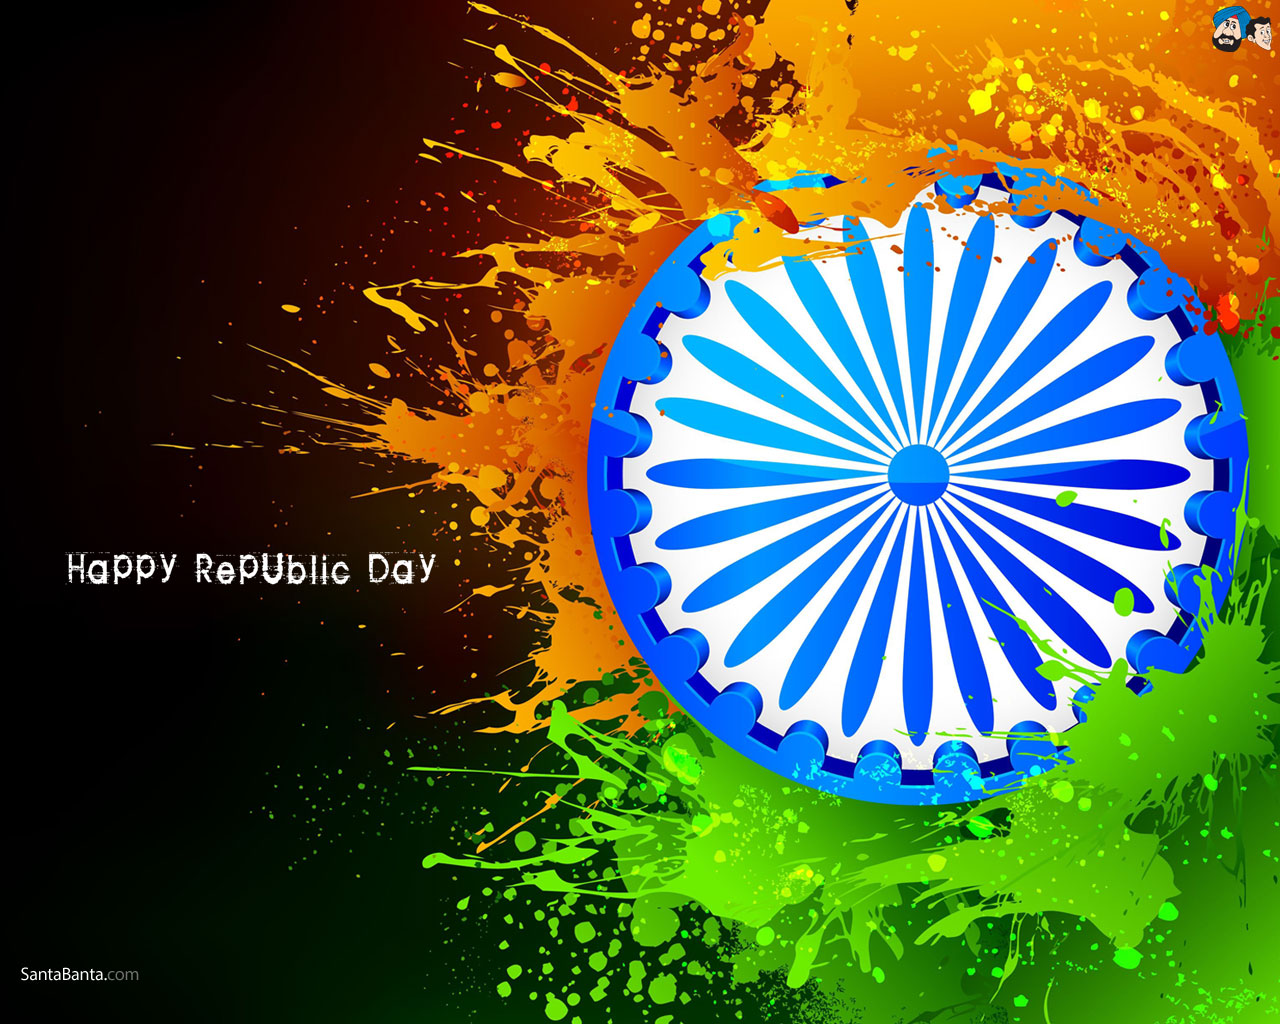 Happy Republic Day 2014 Hd Wallpaper Indian Republic Day Happy New Year 2016 Wallpaper Greeting Pictures